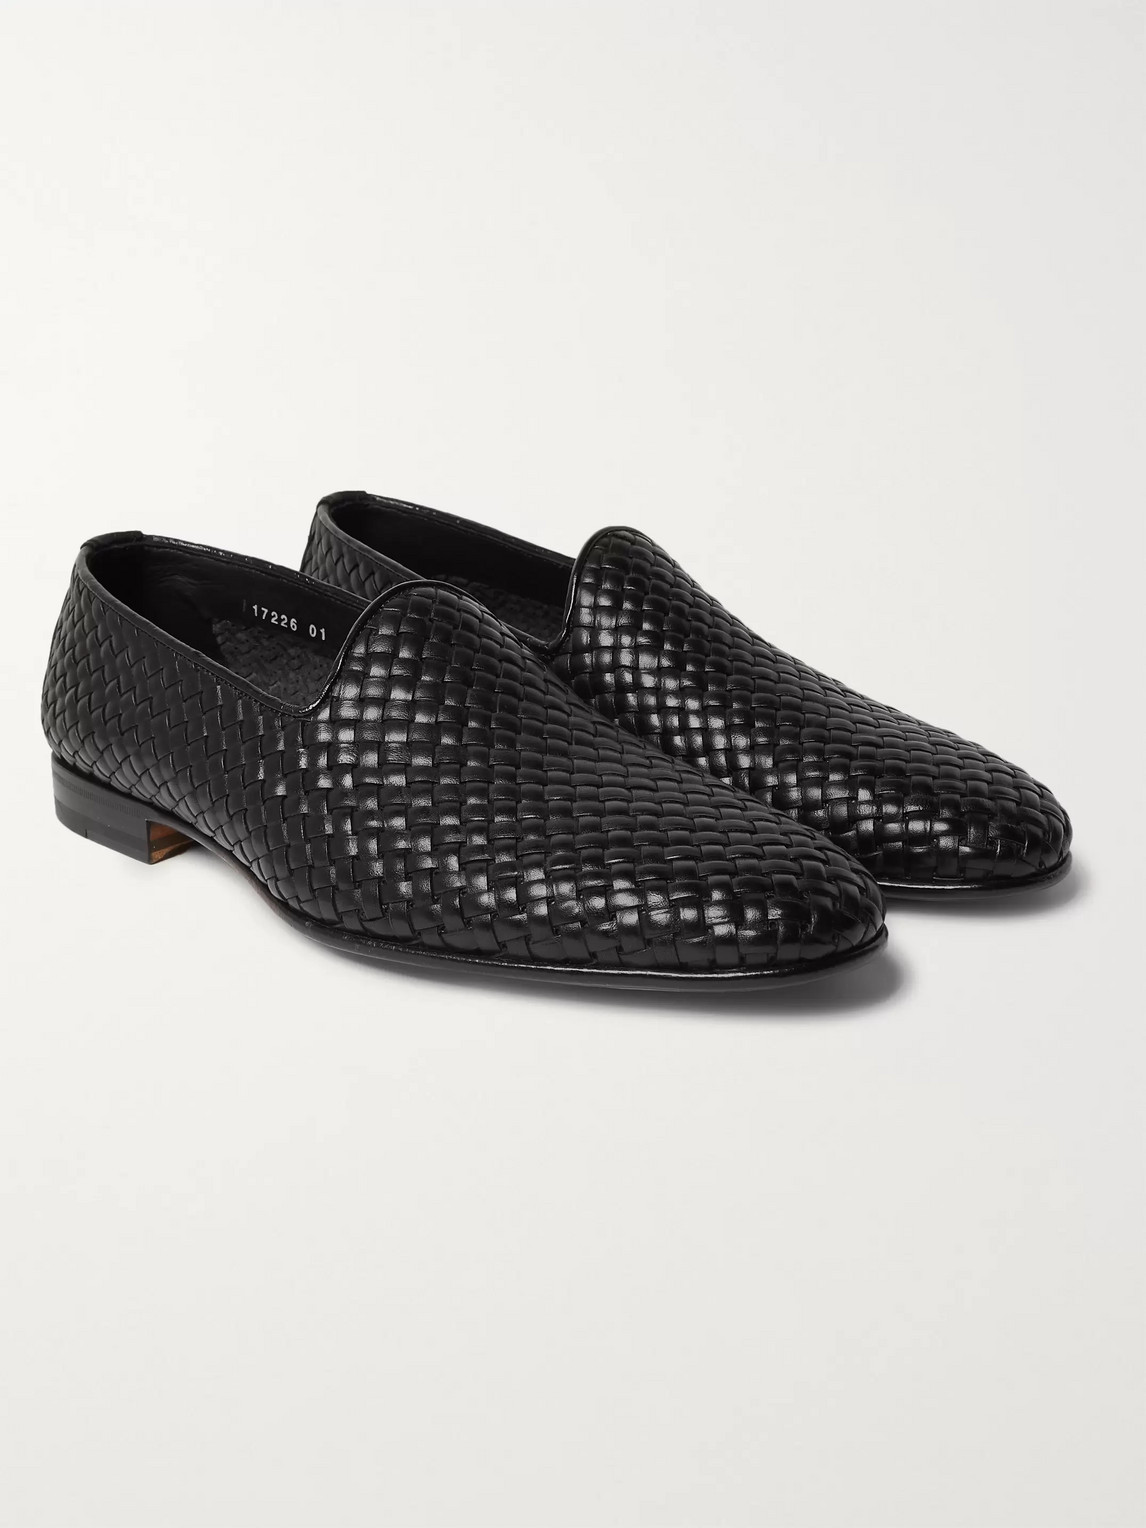 SANTONI WOVEN LEATHER LOAFERS